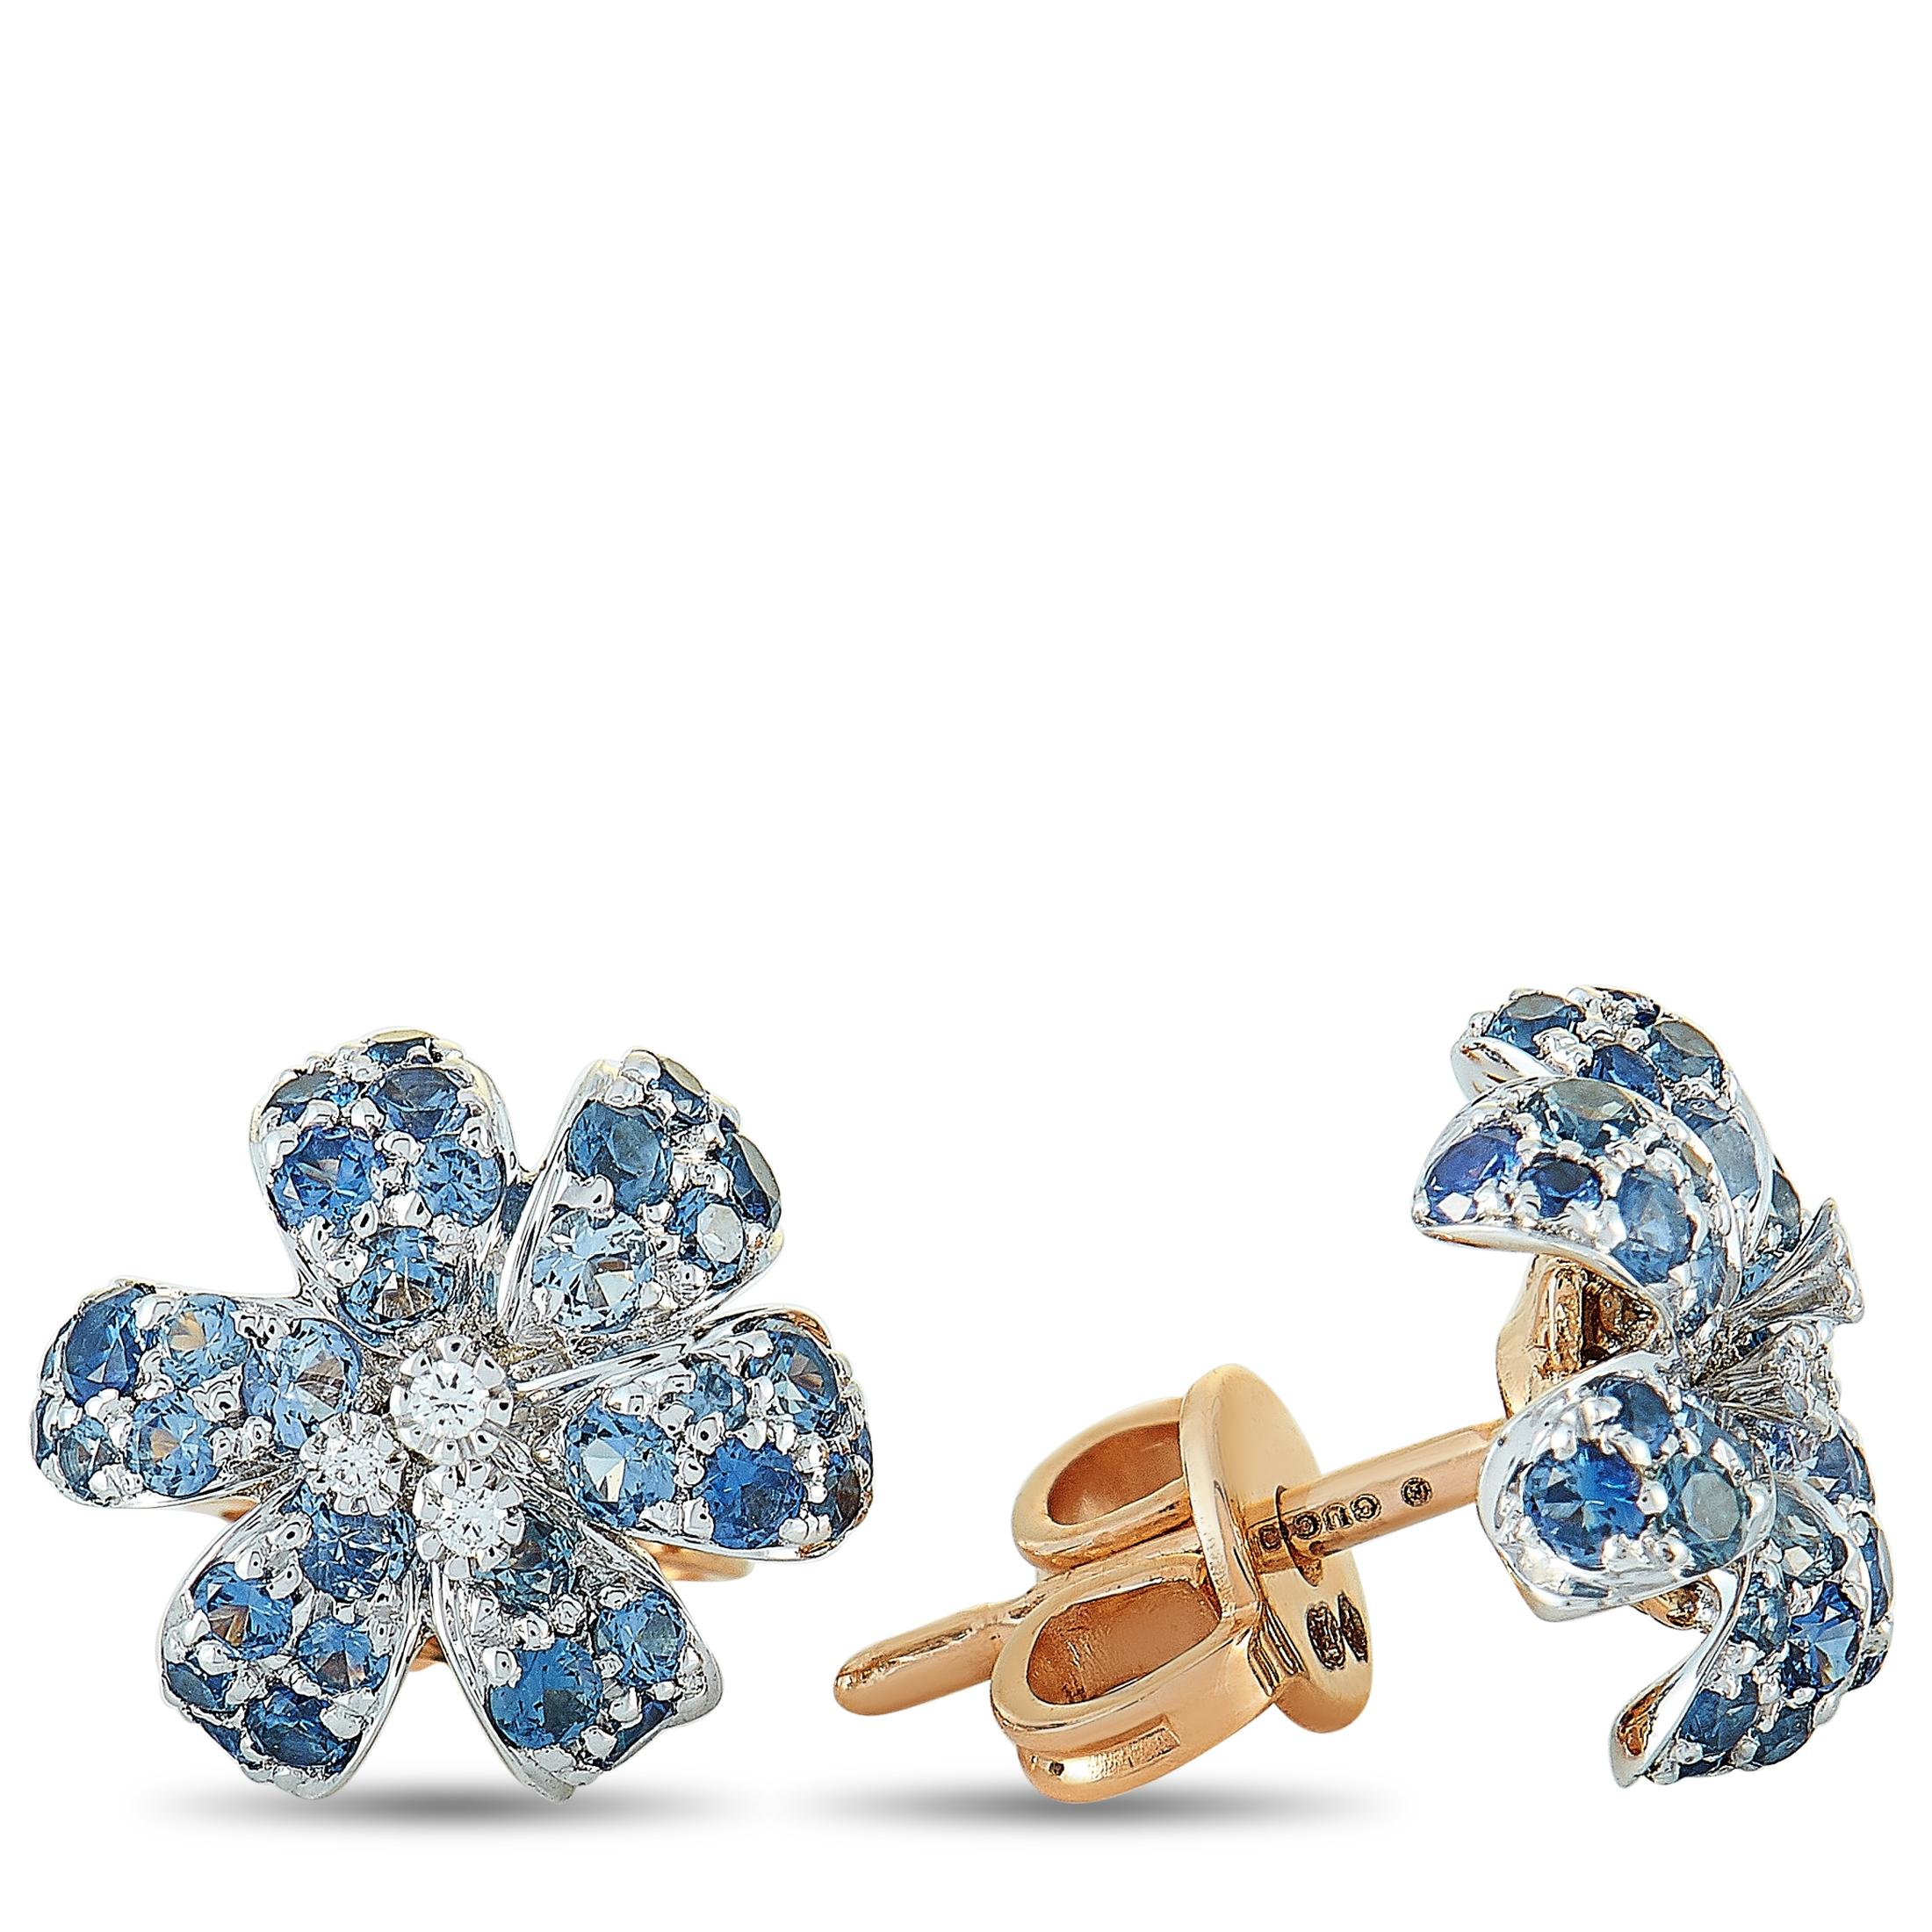 The Gucci “Flora” earrings are made out of 18K white and yellow gold and each of the two weighs 1.5 grams. The pair is set with a total of 0.93 carats of sapphires and a total of 0.02 carats of diamonds that boast GH color and VVS clarity. The